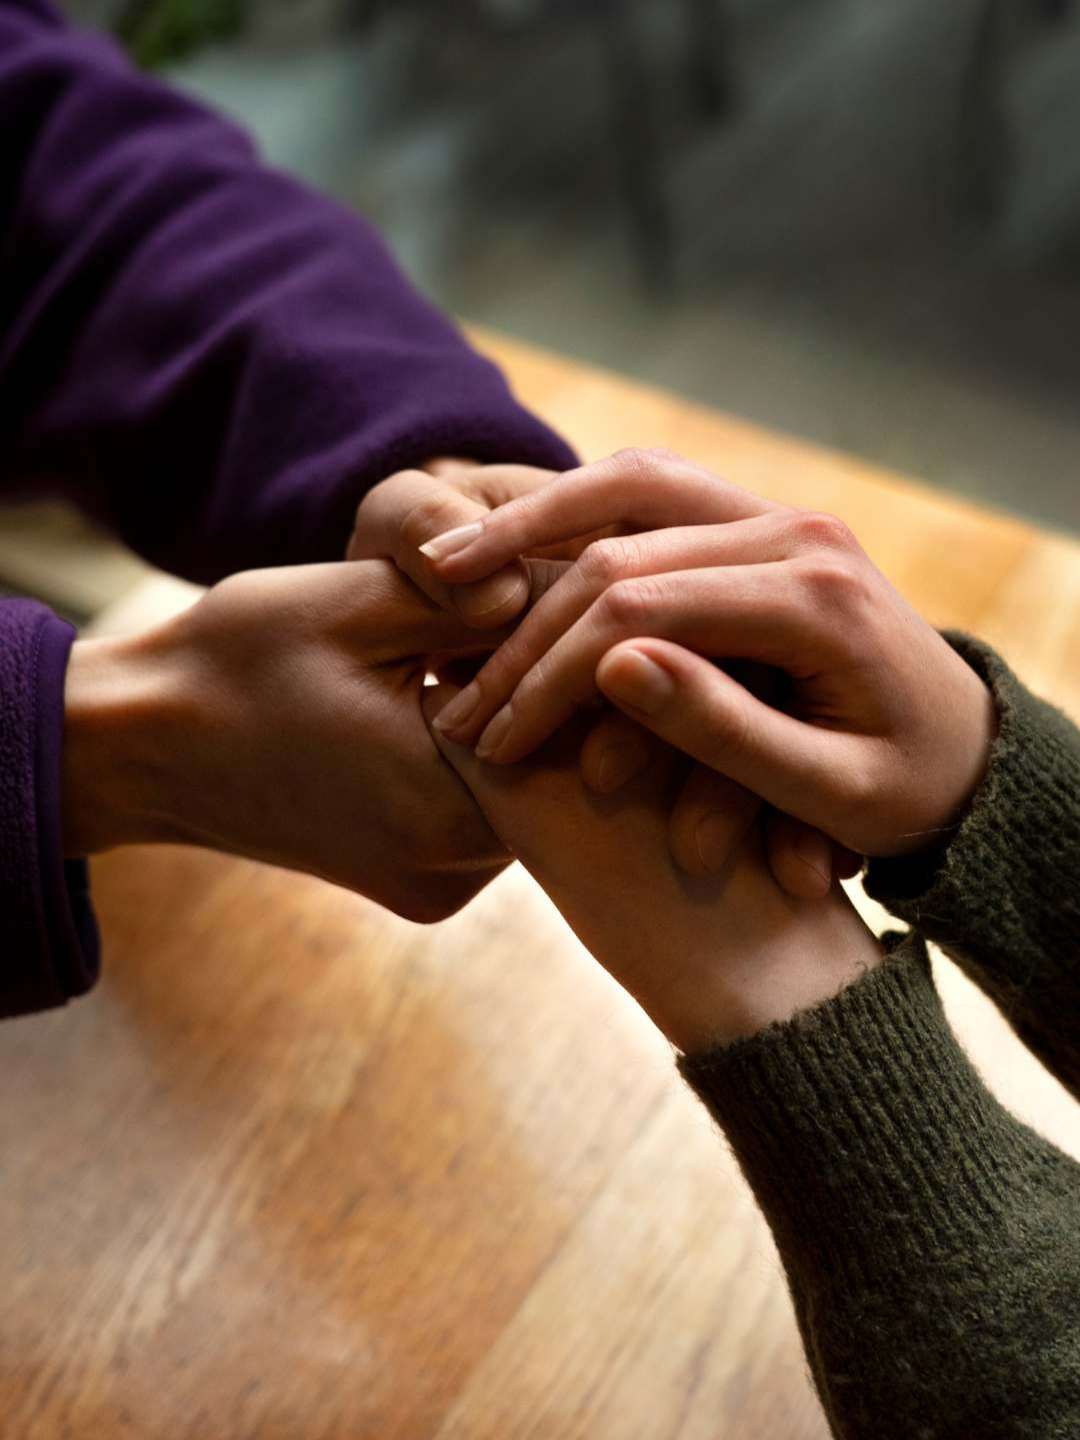 individuals supporting each other with hand holding.